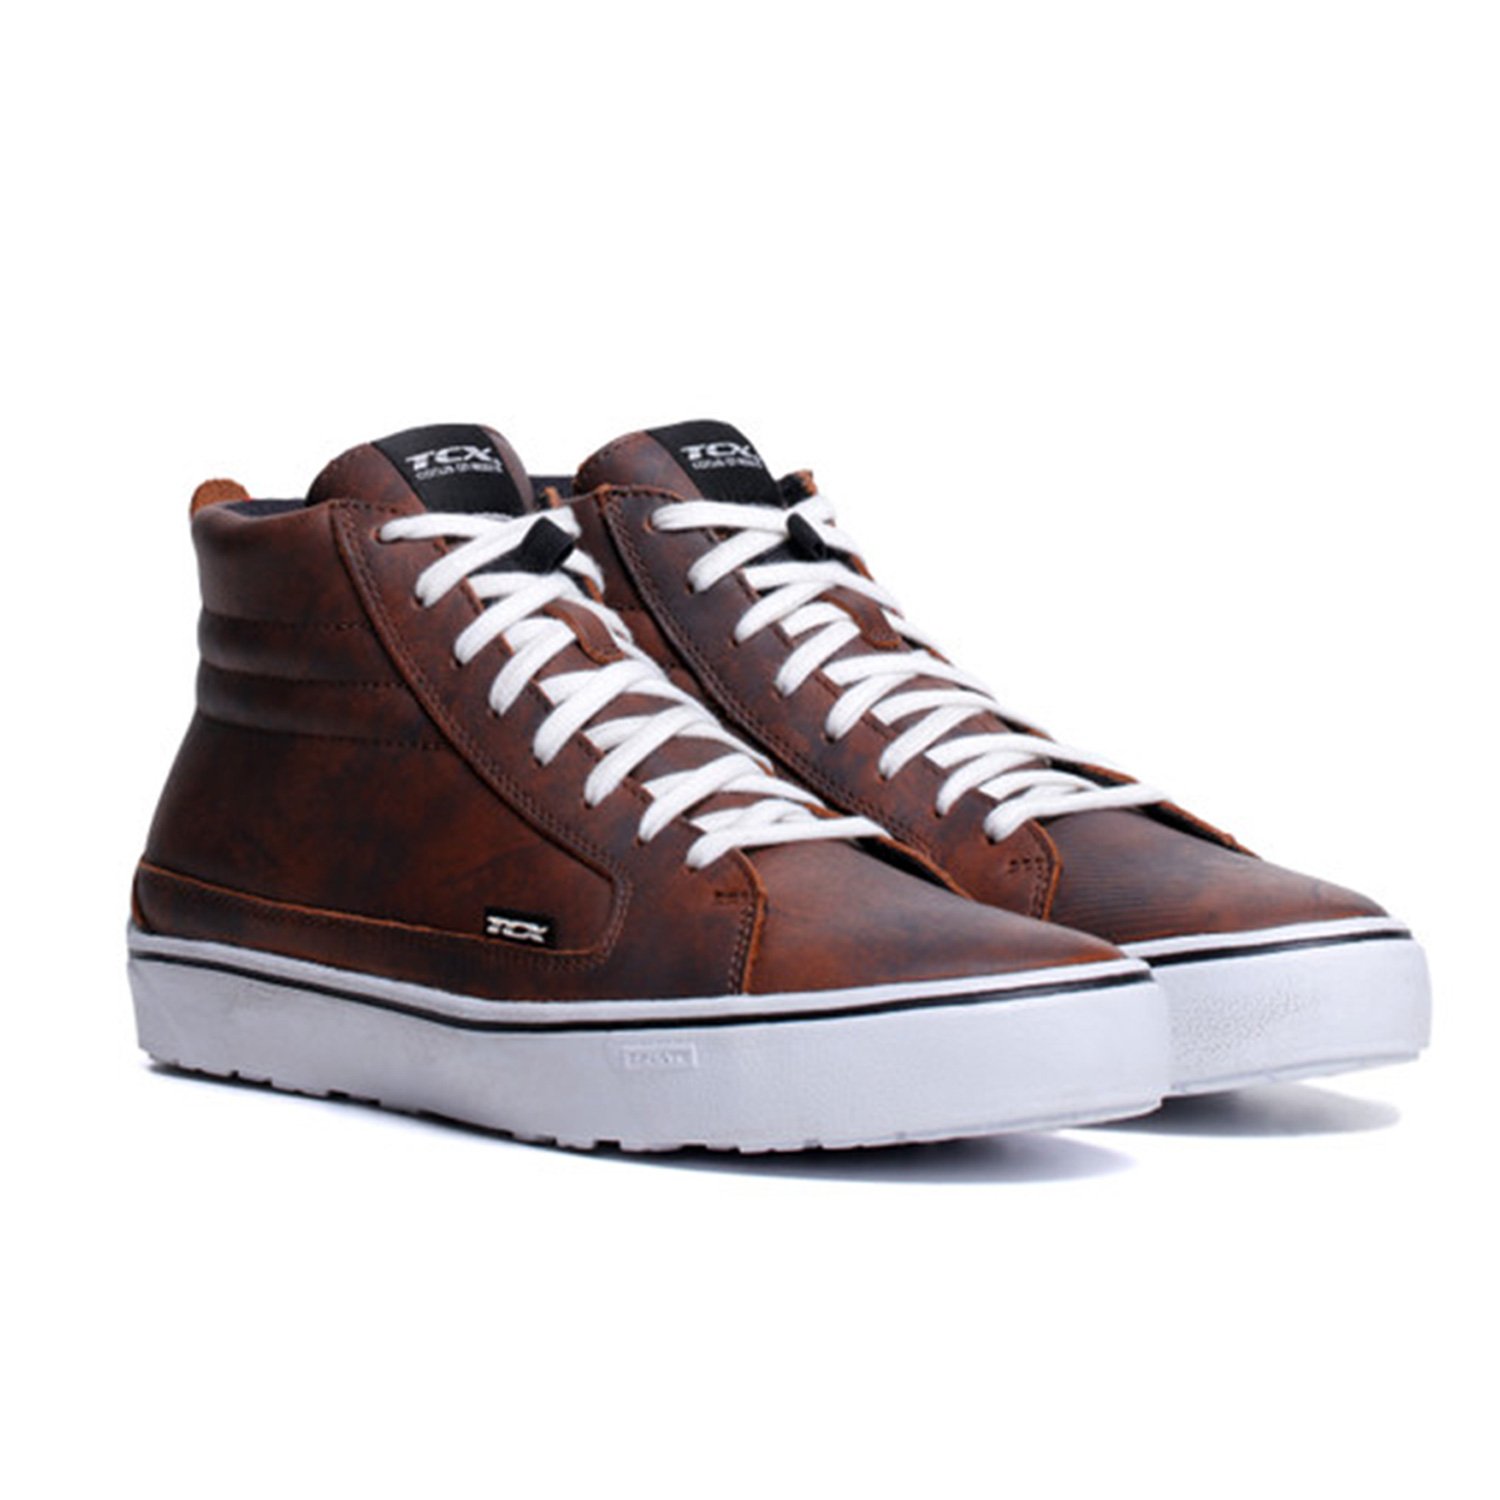 Image of TCX Street 3 WP Marron Blanc Chaussures Taille 41